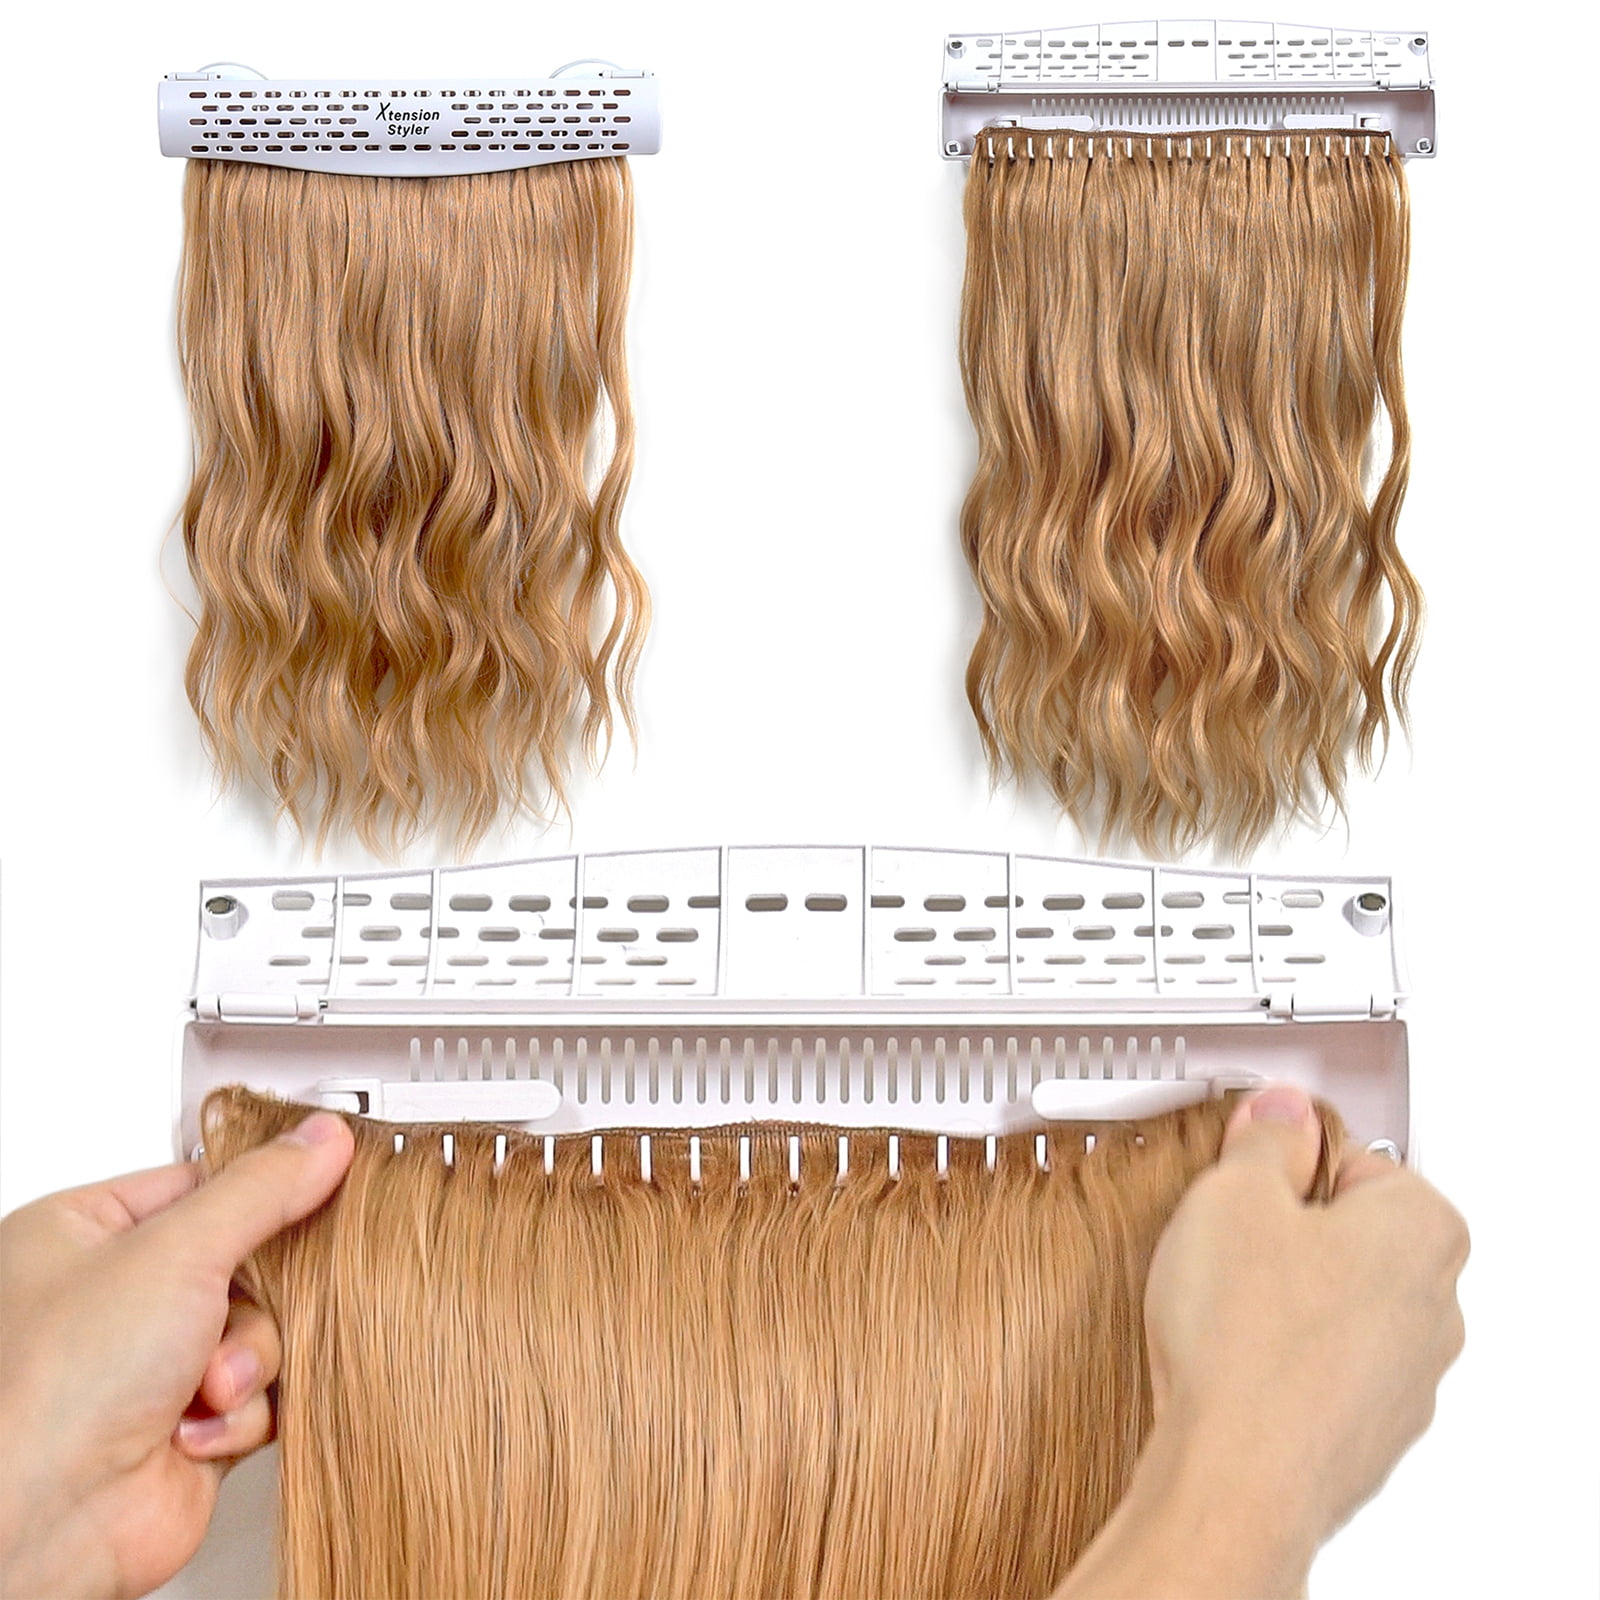 Hair Extension Holder, Braiding Hair Rack, Hair Extension Hanger,  Professional Extra Wide Weft Halo Hair Extensions for Washing, Coloring,  Styling